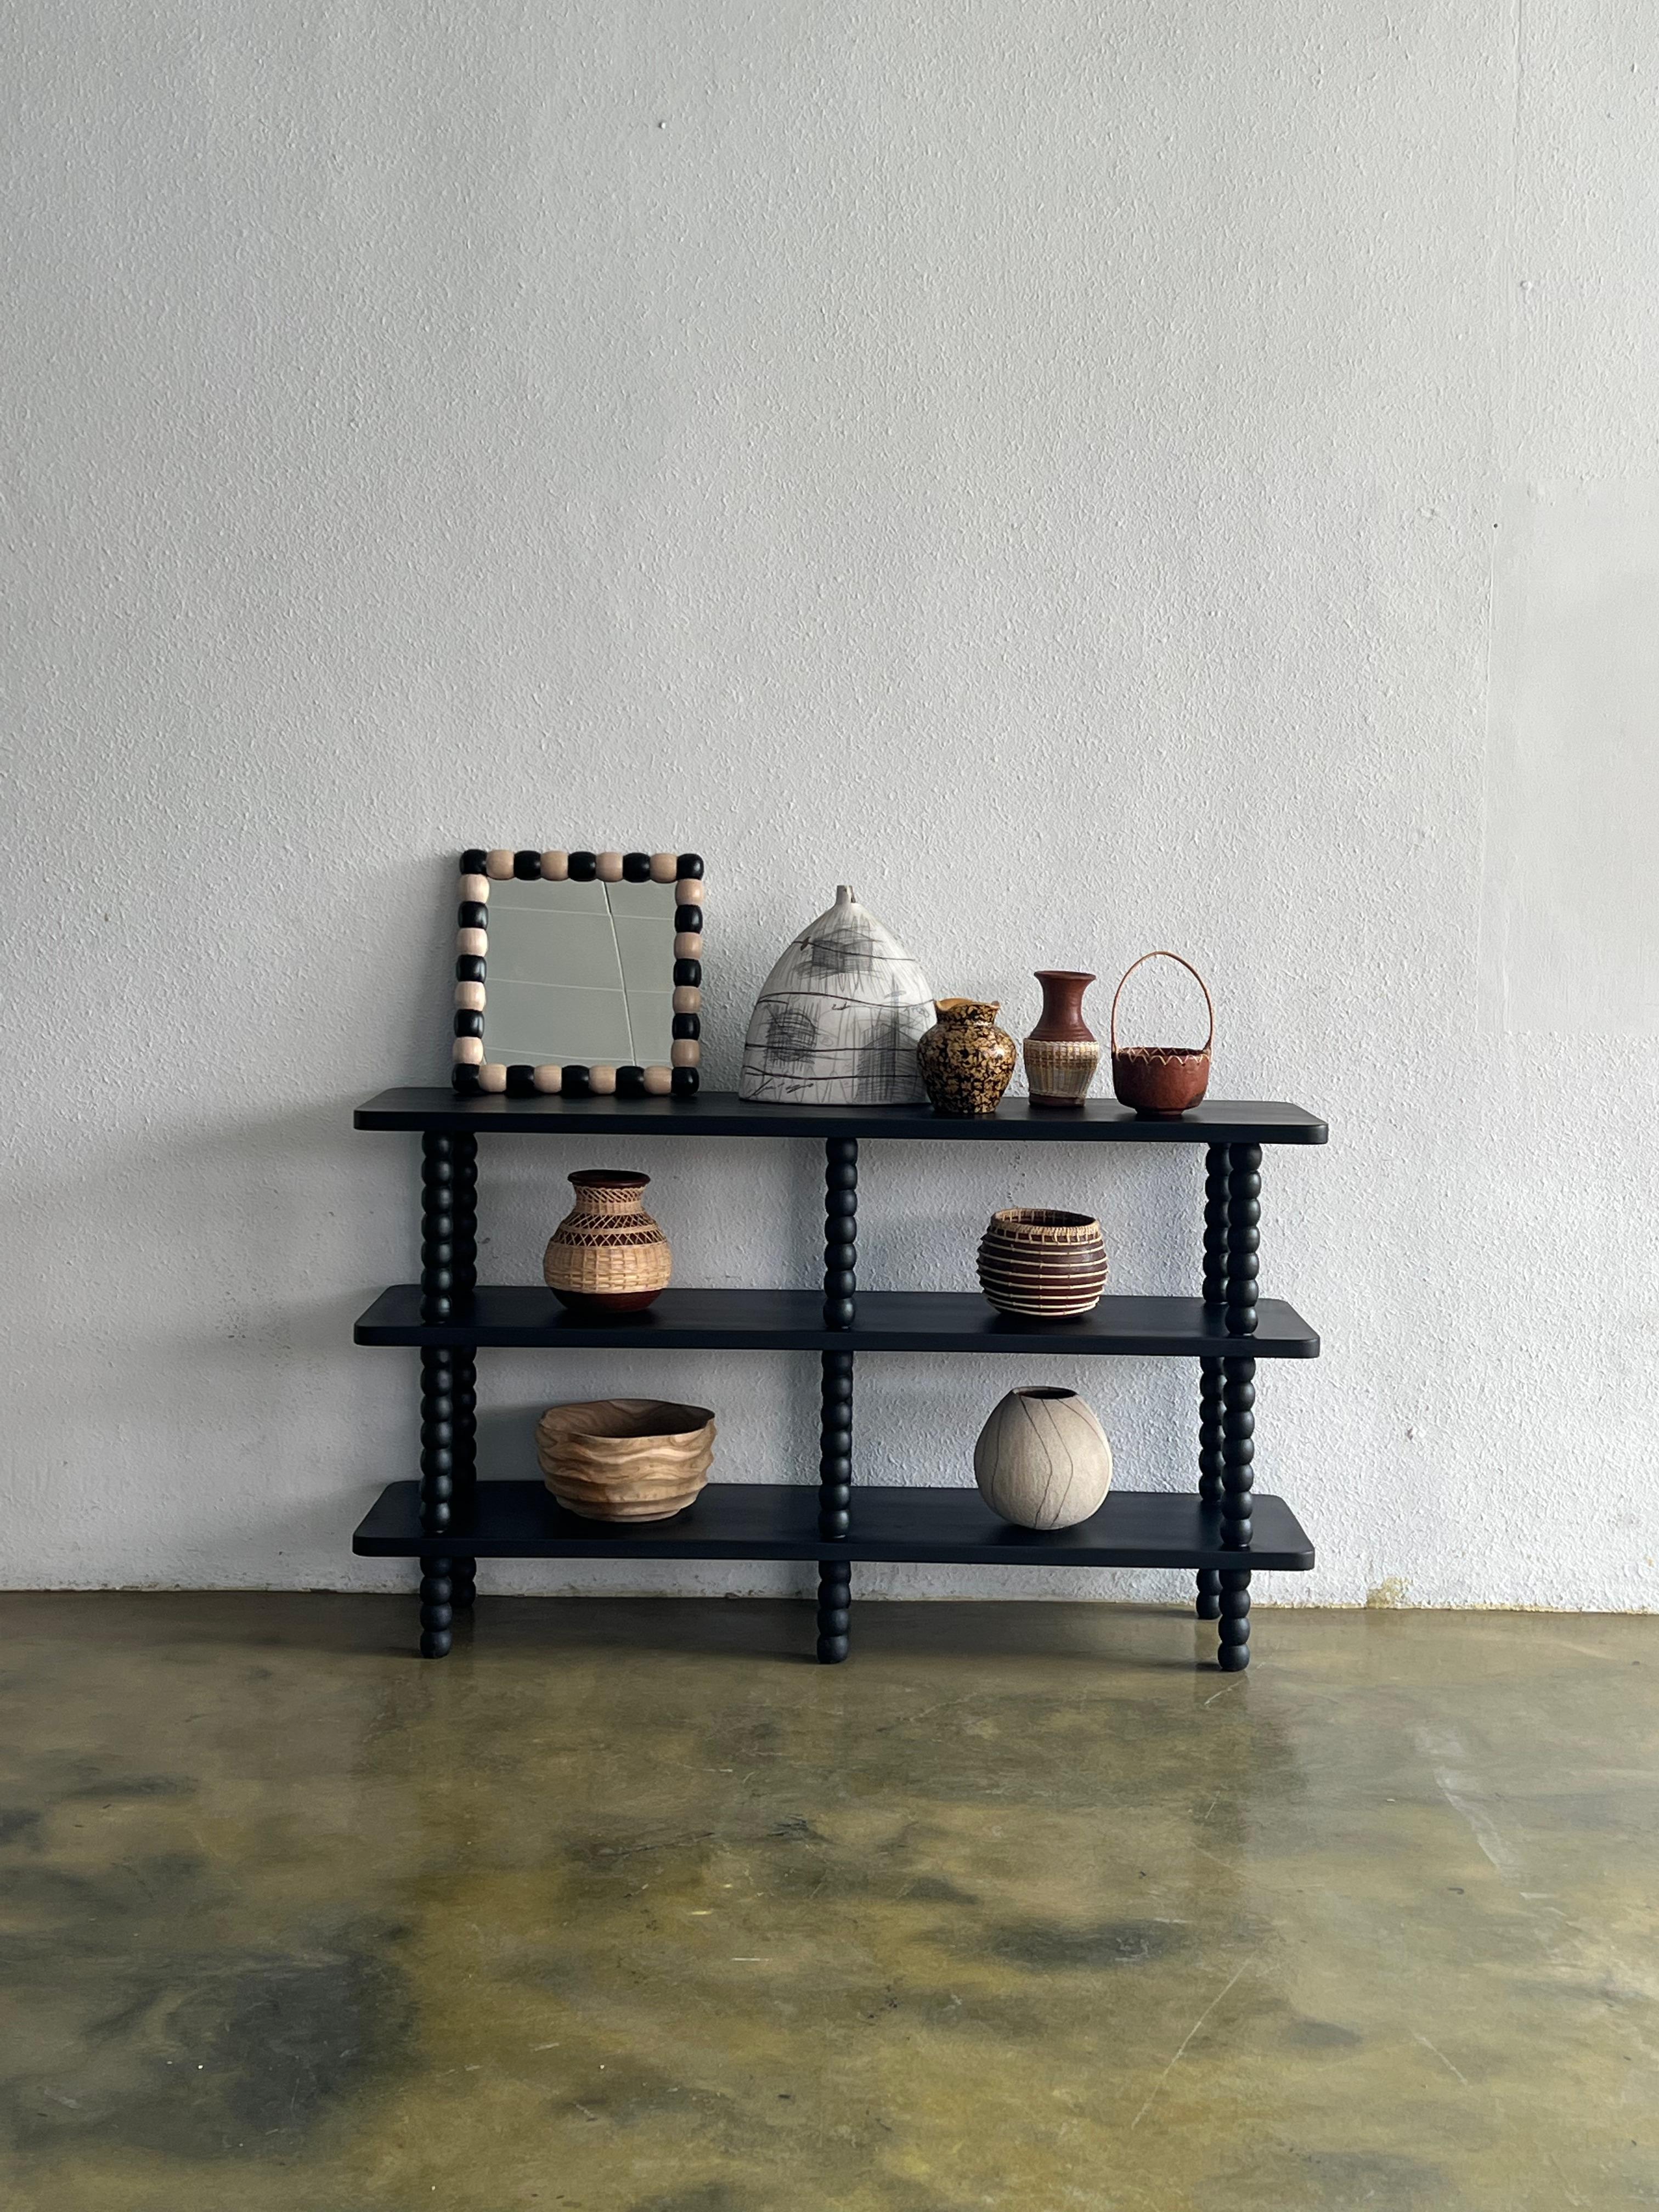 Onde Shelf by Studio Kallang
Dimensions: W 120 x D 38 x H 86 cm
Materials: Solid Teak.
Finish: All Black (L), Natural + Black (R)
Square or Rounded Corners.

STUDIO KALLANG IS A SINGAPORE AND SEATTLE BASED PROJECT FOCUSING ON OBJECTS DESIGNED BY